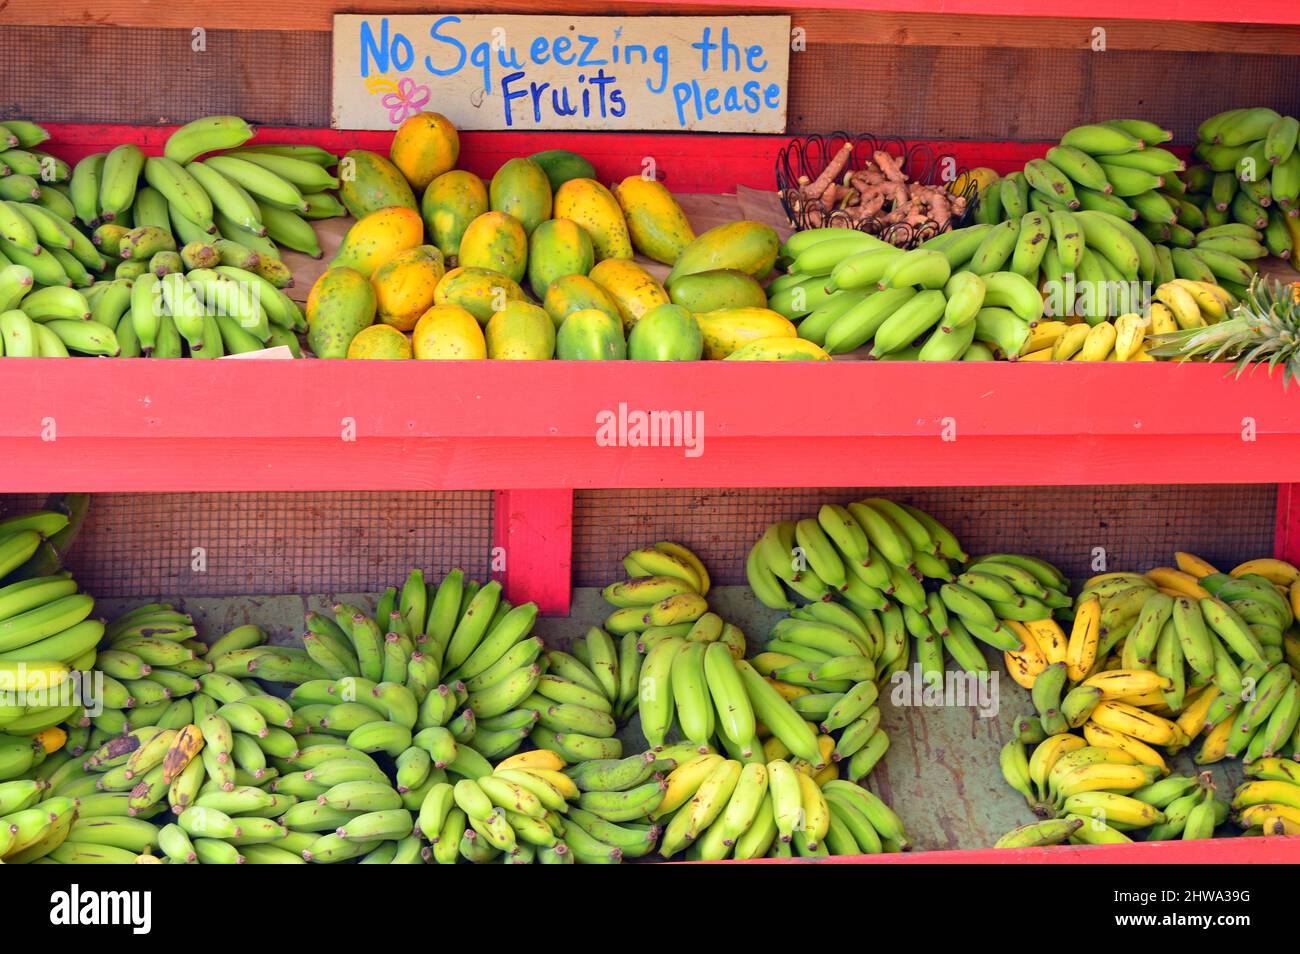 Bananas and guavas are so ripe; customers are reminded to avoid the impulse to squeeze Stock Photo